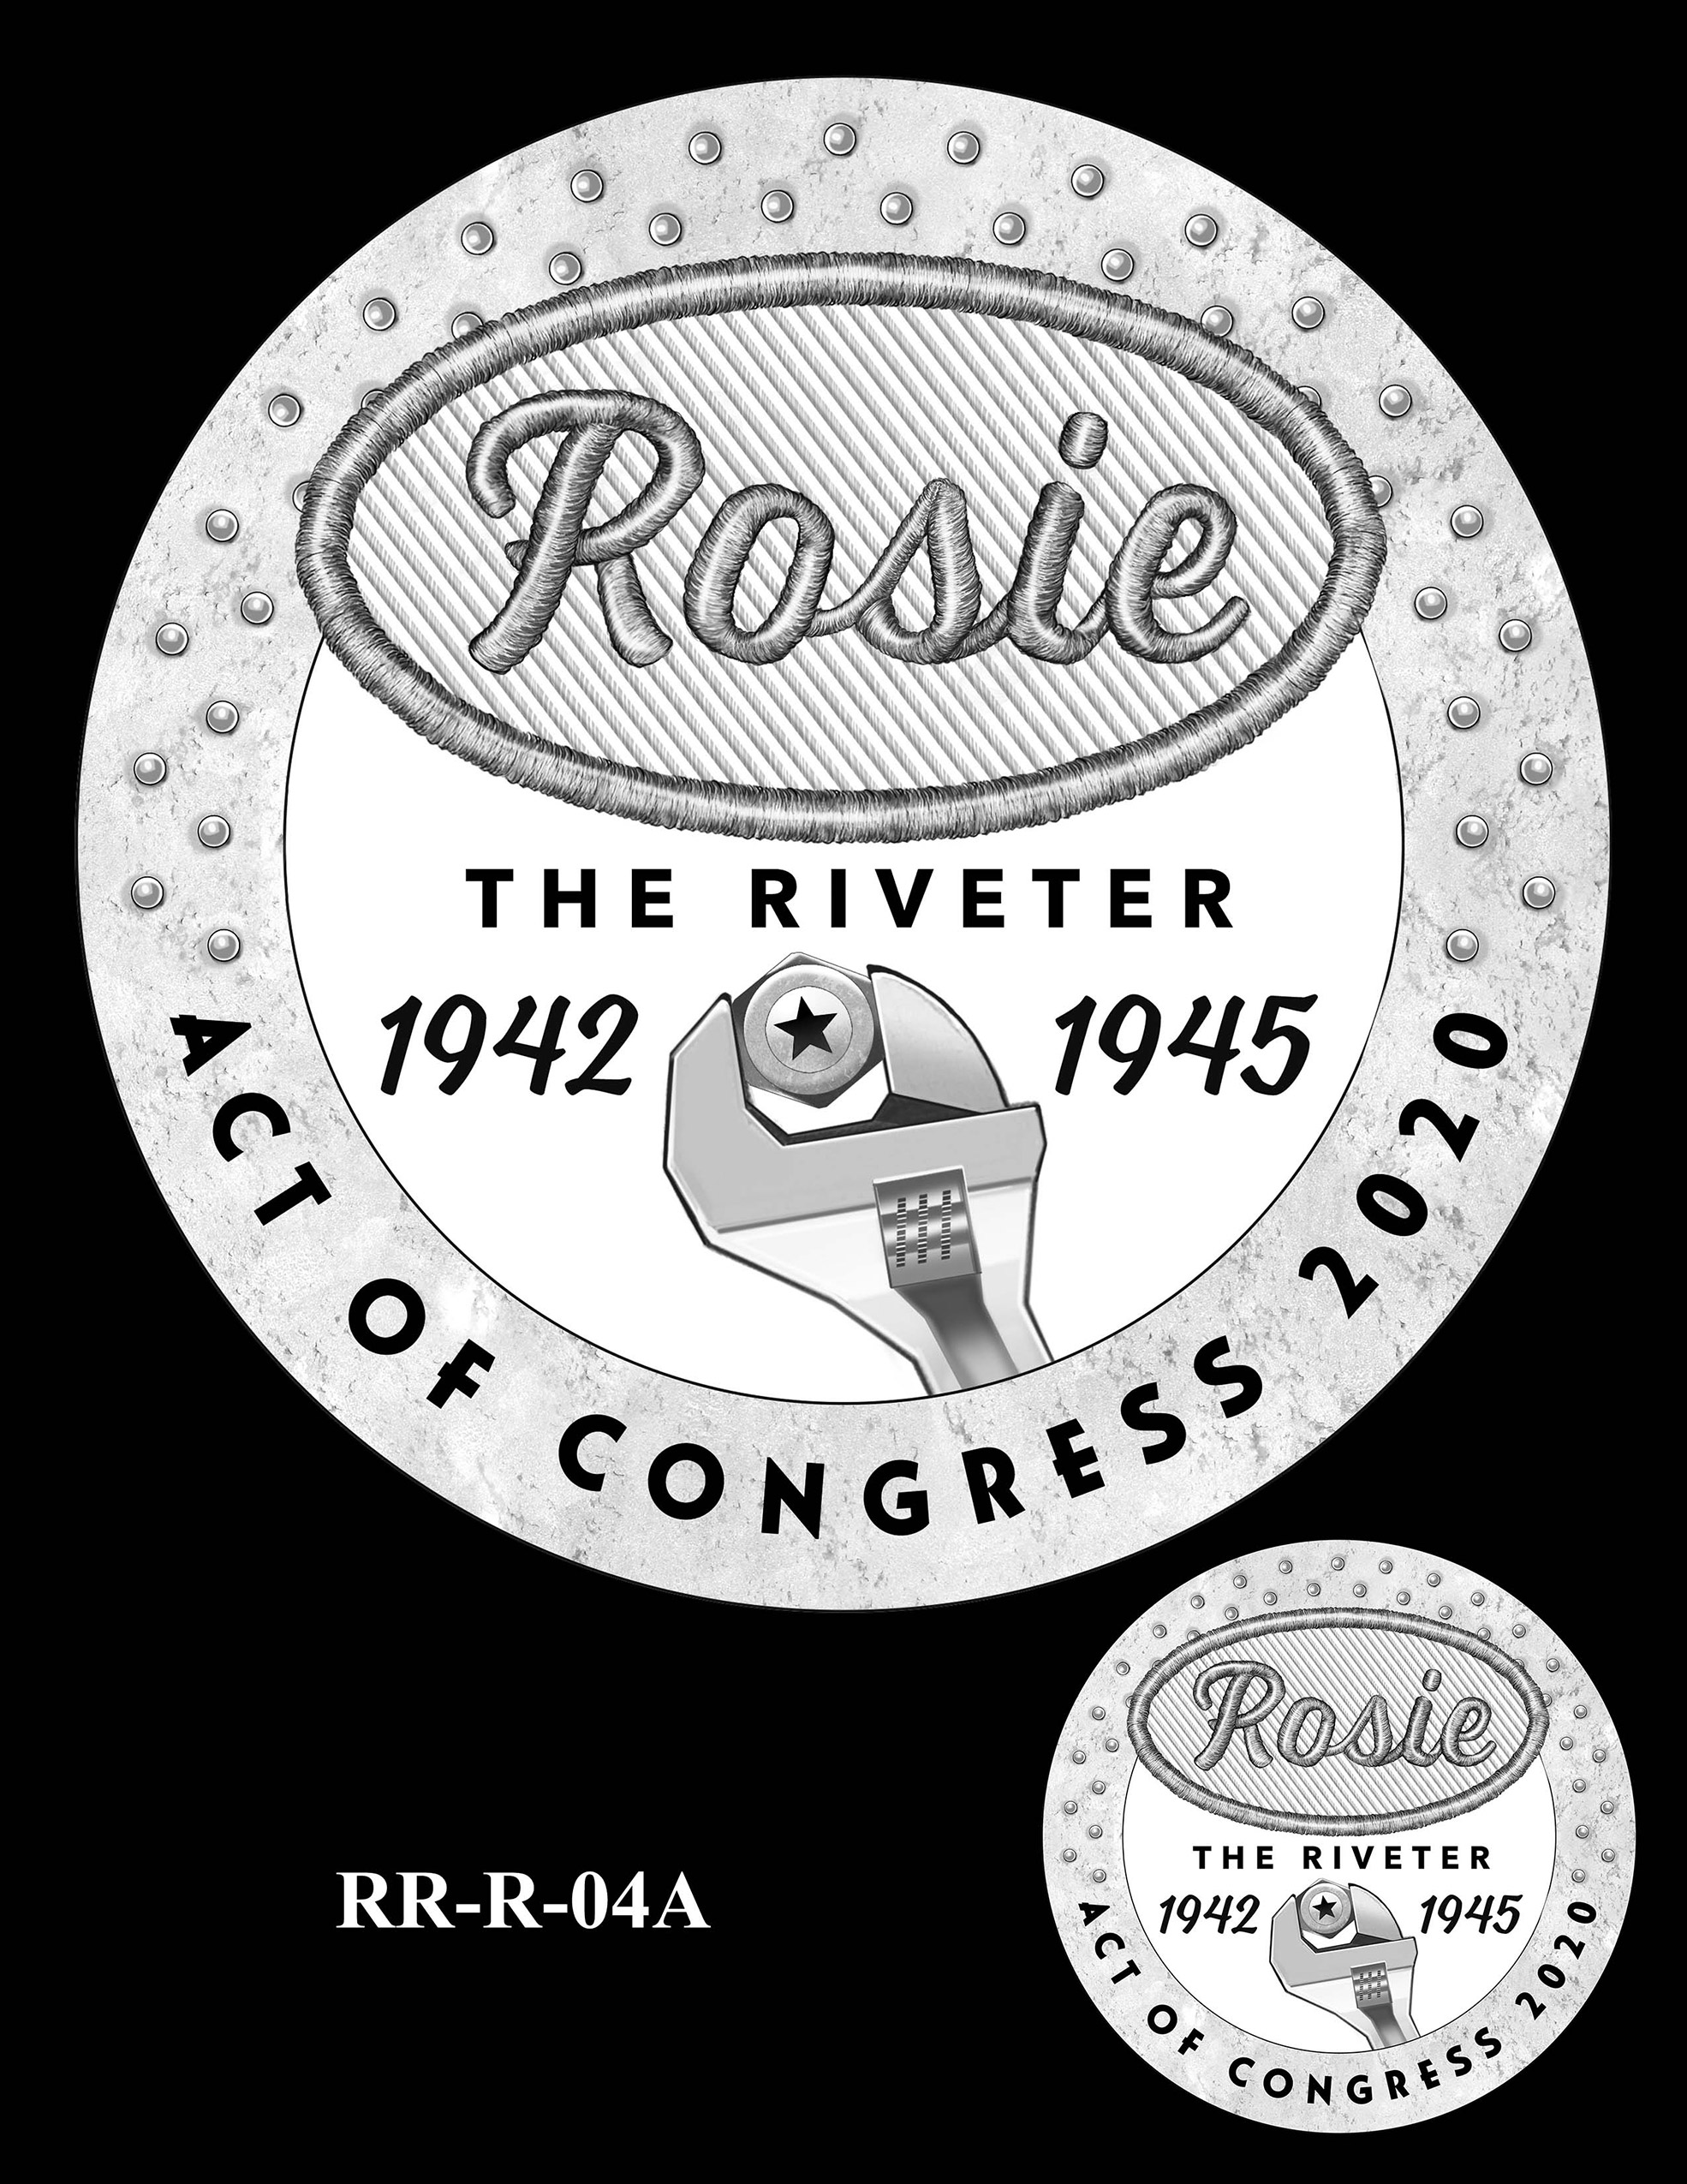 RR-R-04A -- Rosie the Riveter Congressional Gold Medal